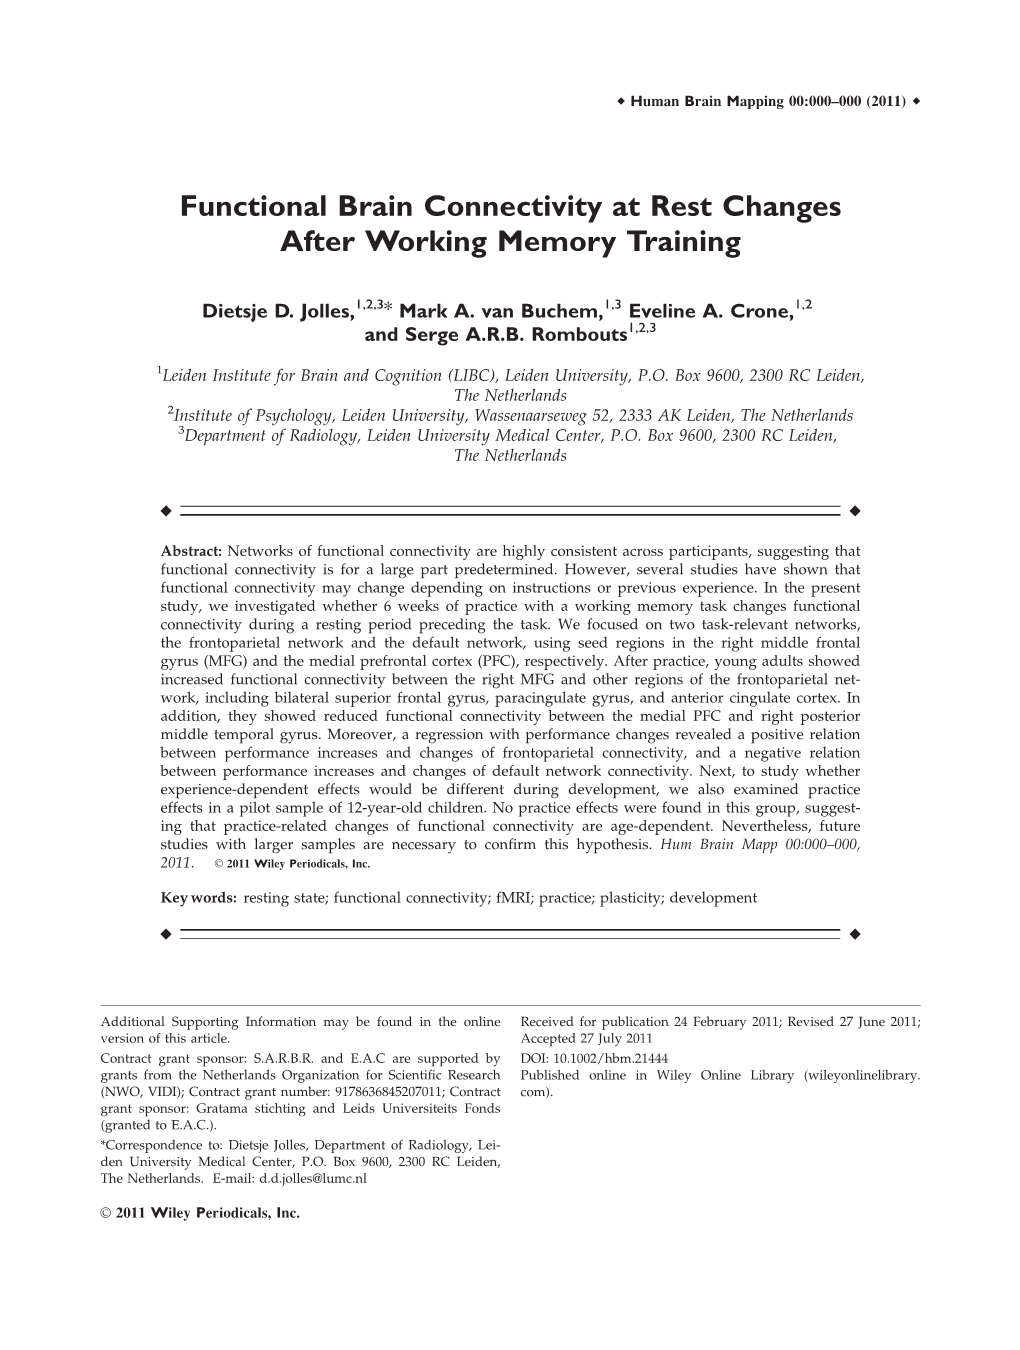 Functional Brain Connectivity at Rest Changes After Working Memory Training